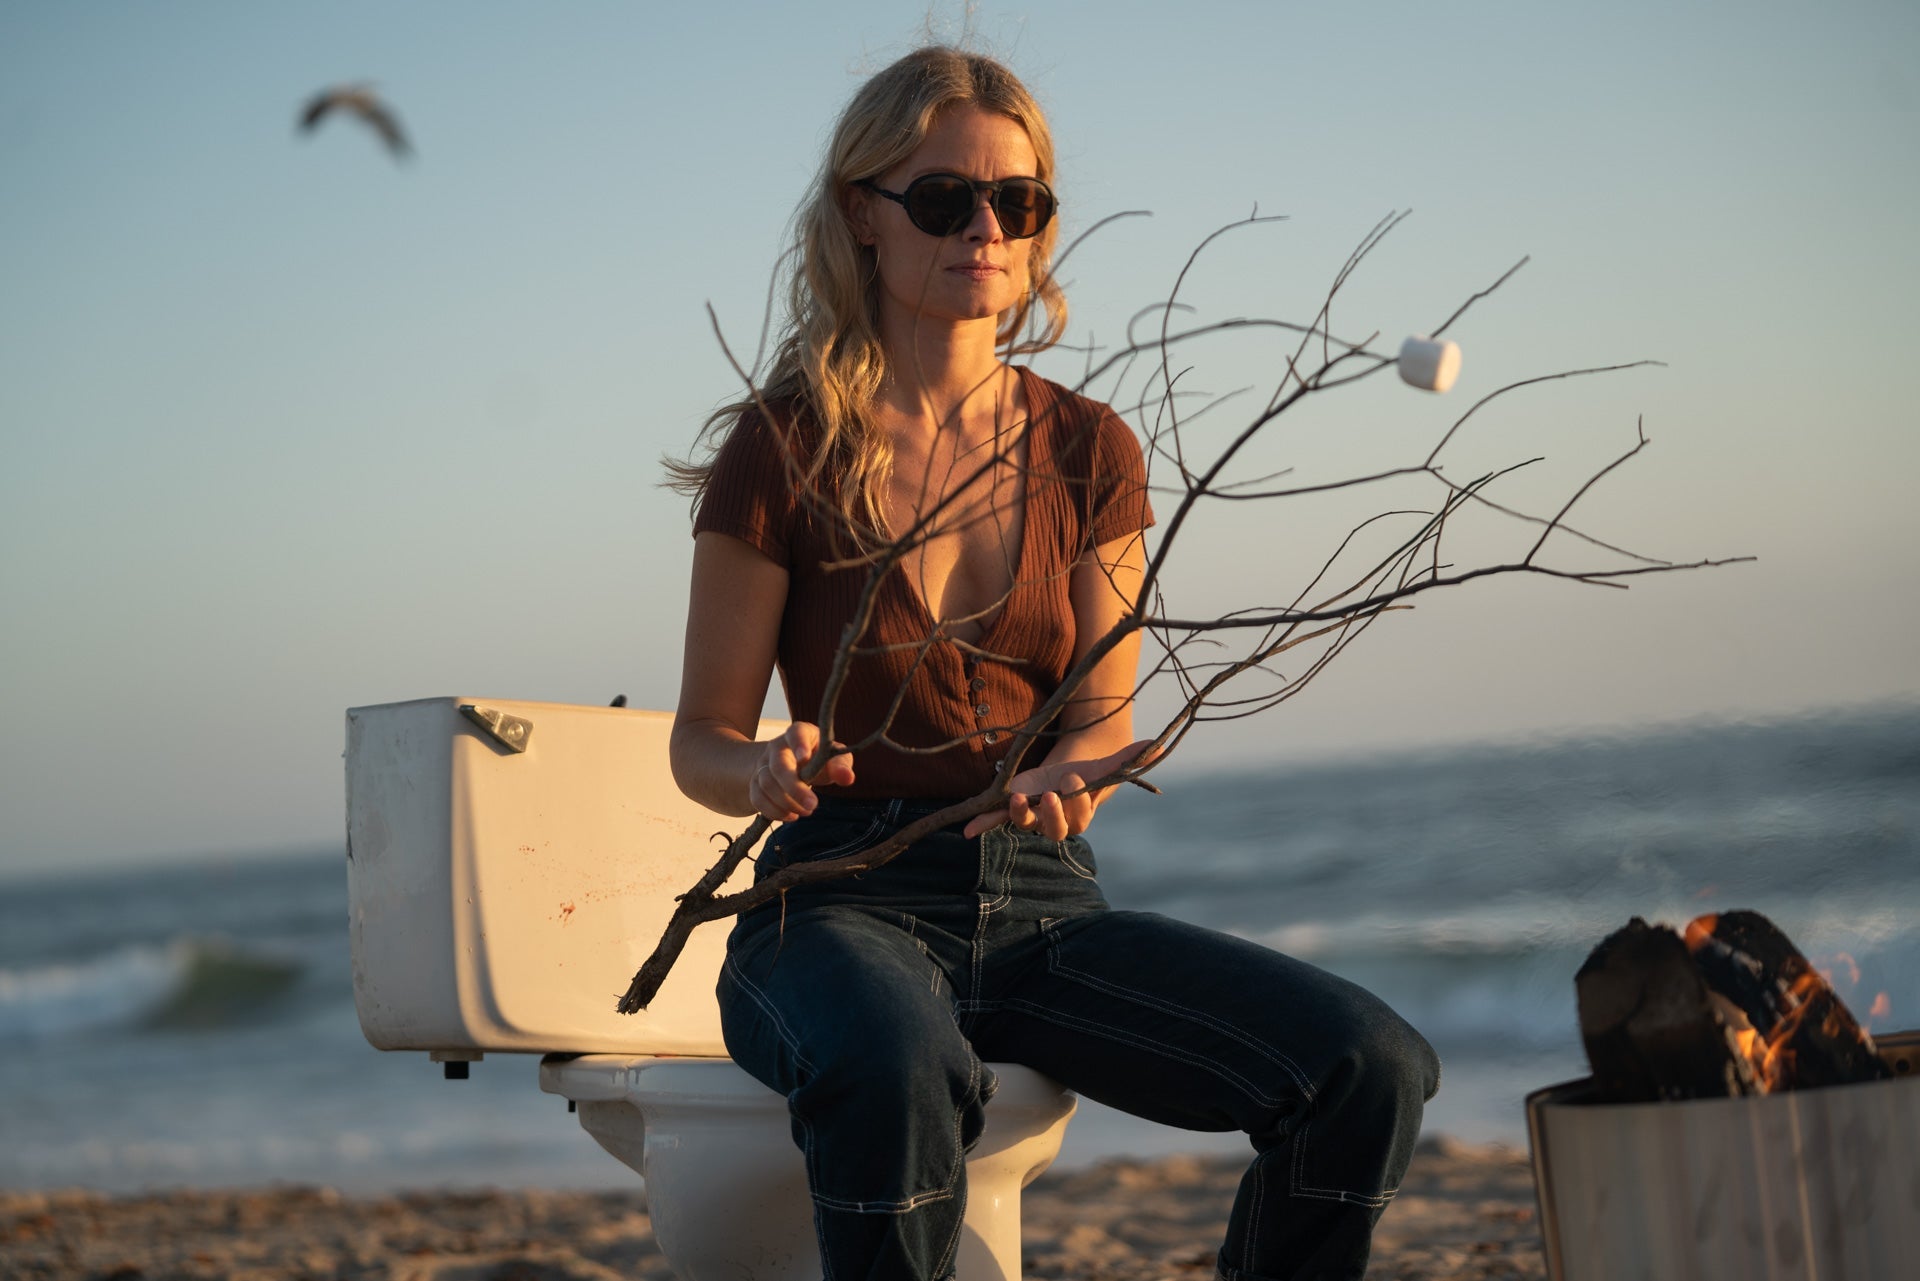 VIALE_CHARCOAL_BROWN Woman at the beach sitting on a toilet roasting marshmallows wearing Ombraz armless strap sunglasses